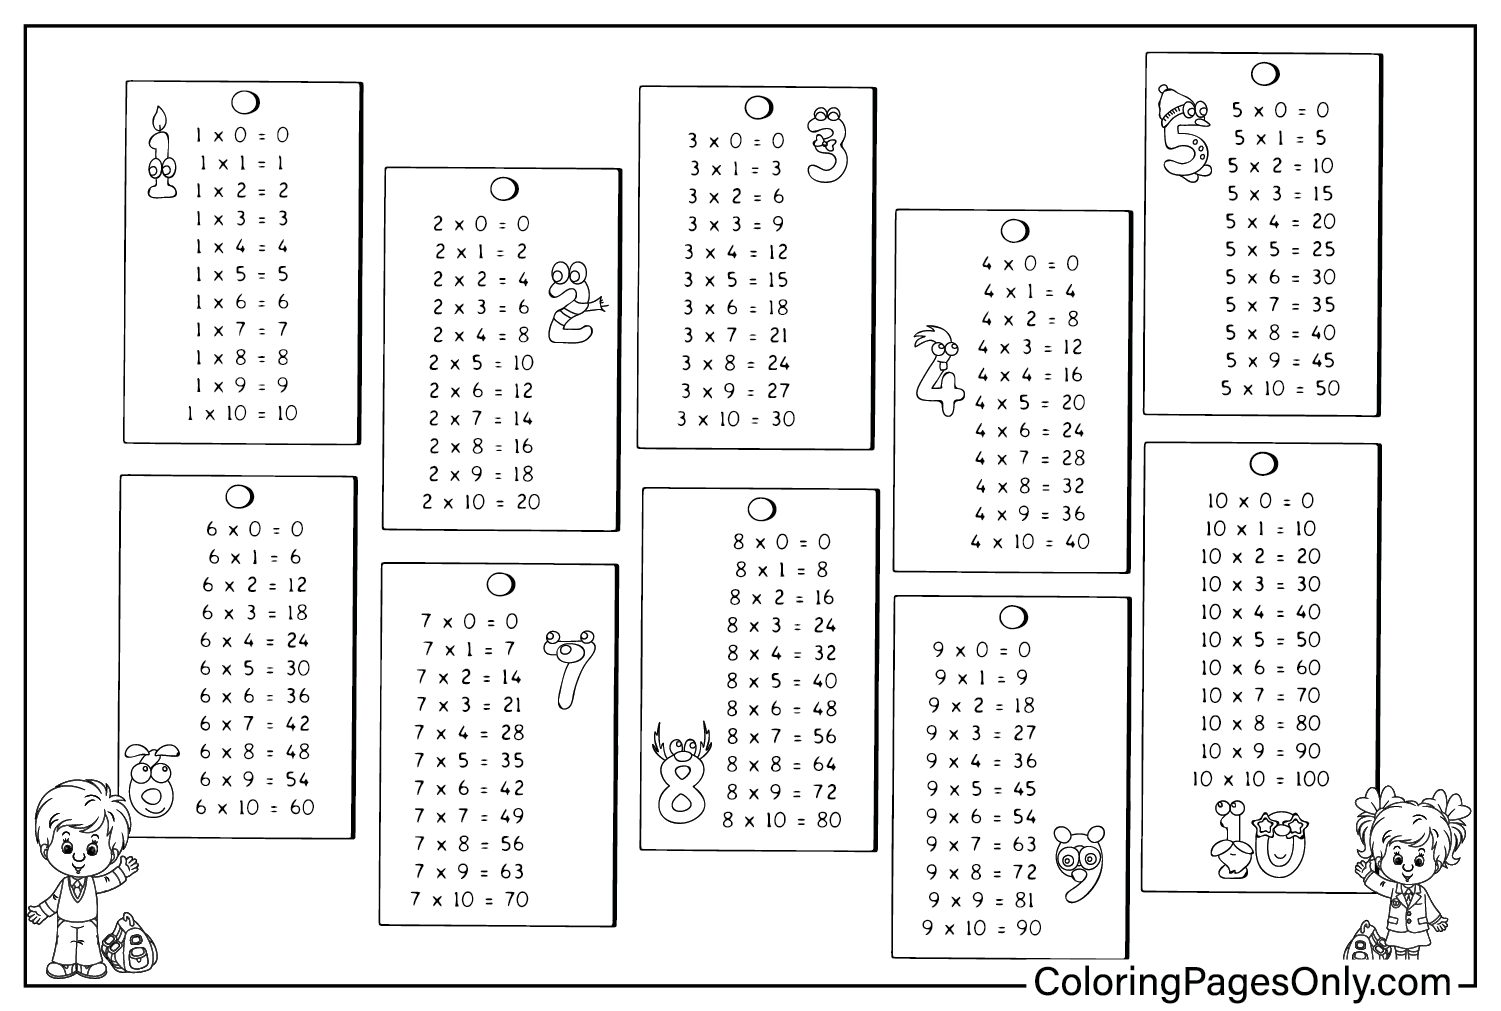 Multiplication Chart Coloring Sheet from Multiplication Chart